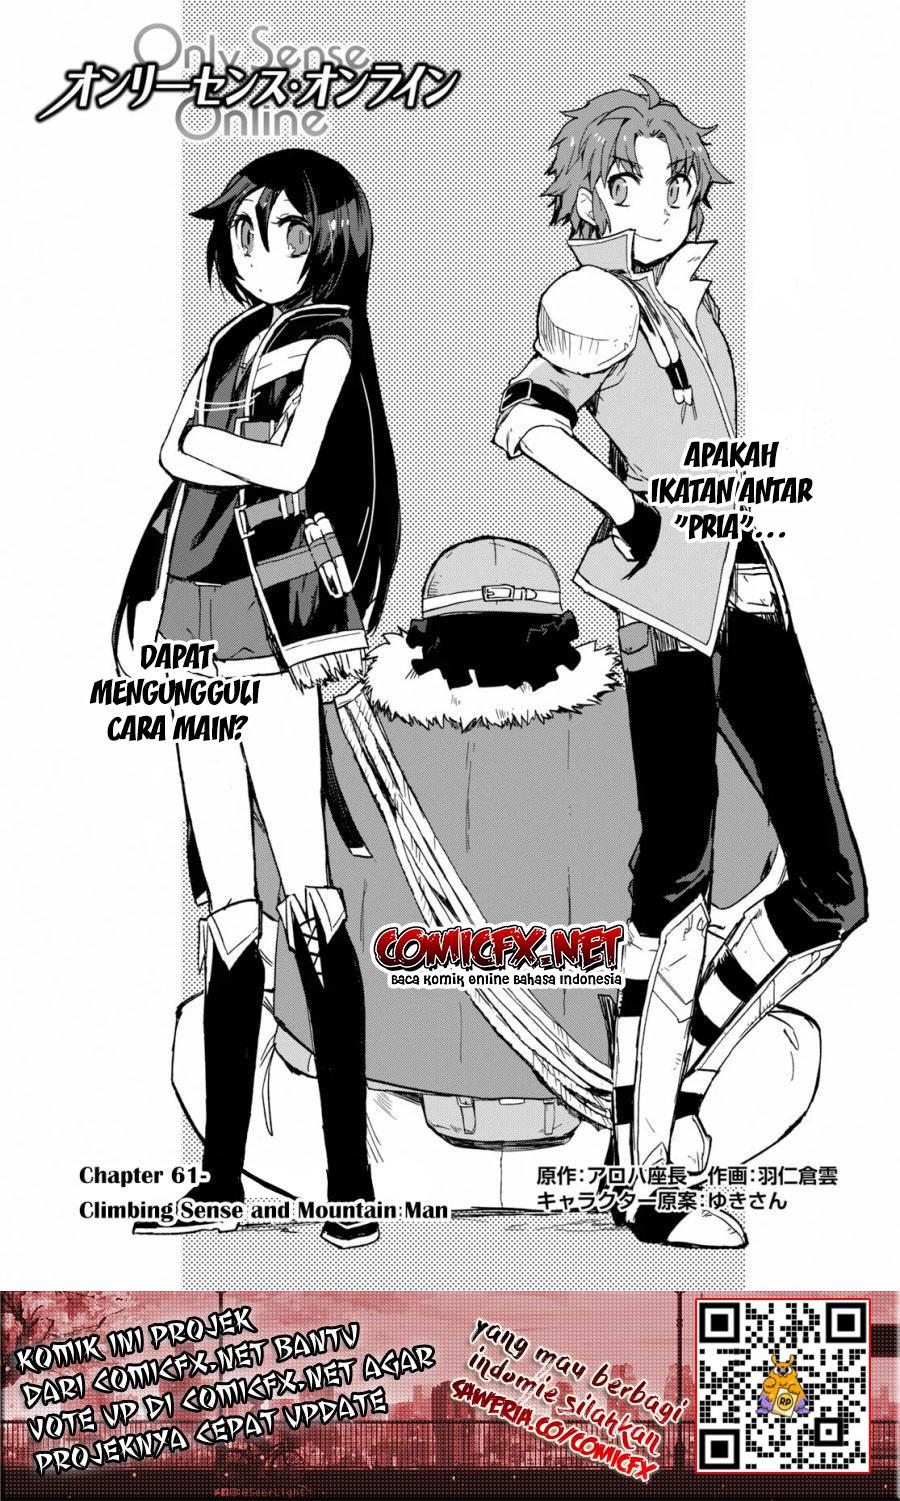 Only Sense Online Chapter 61